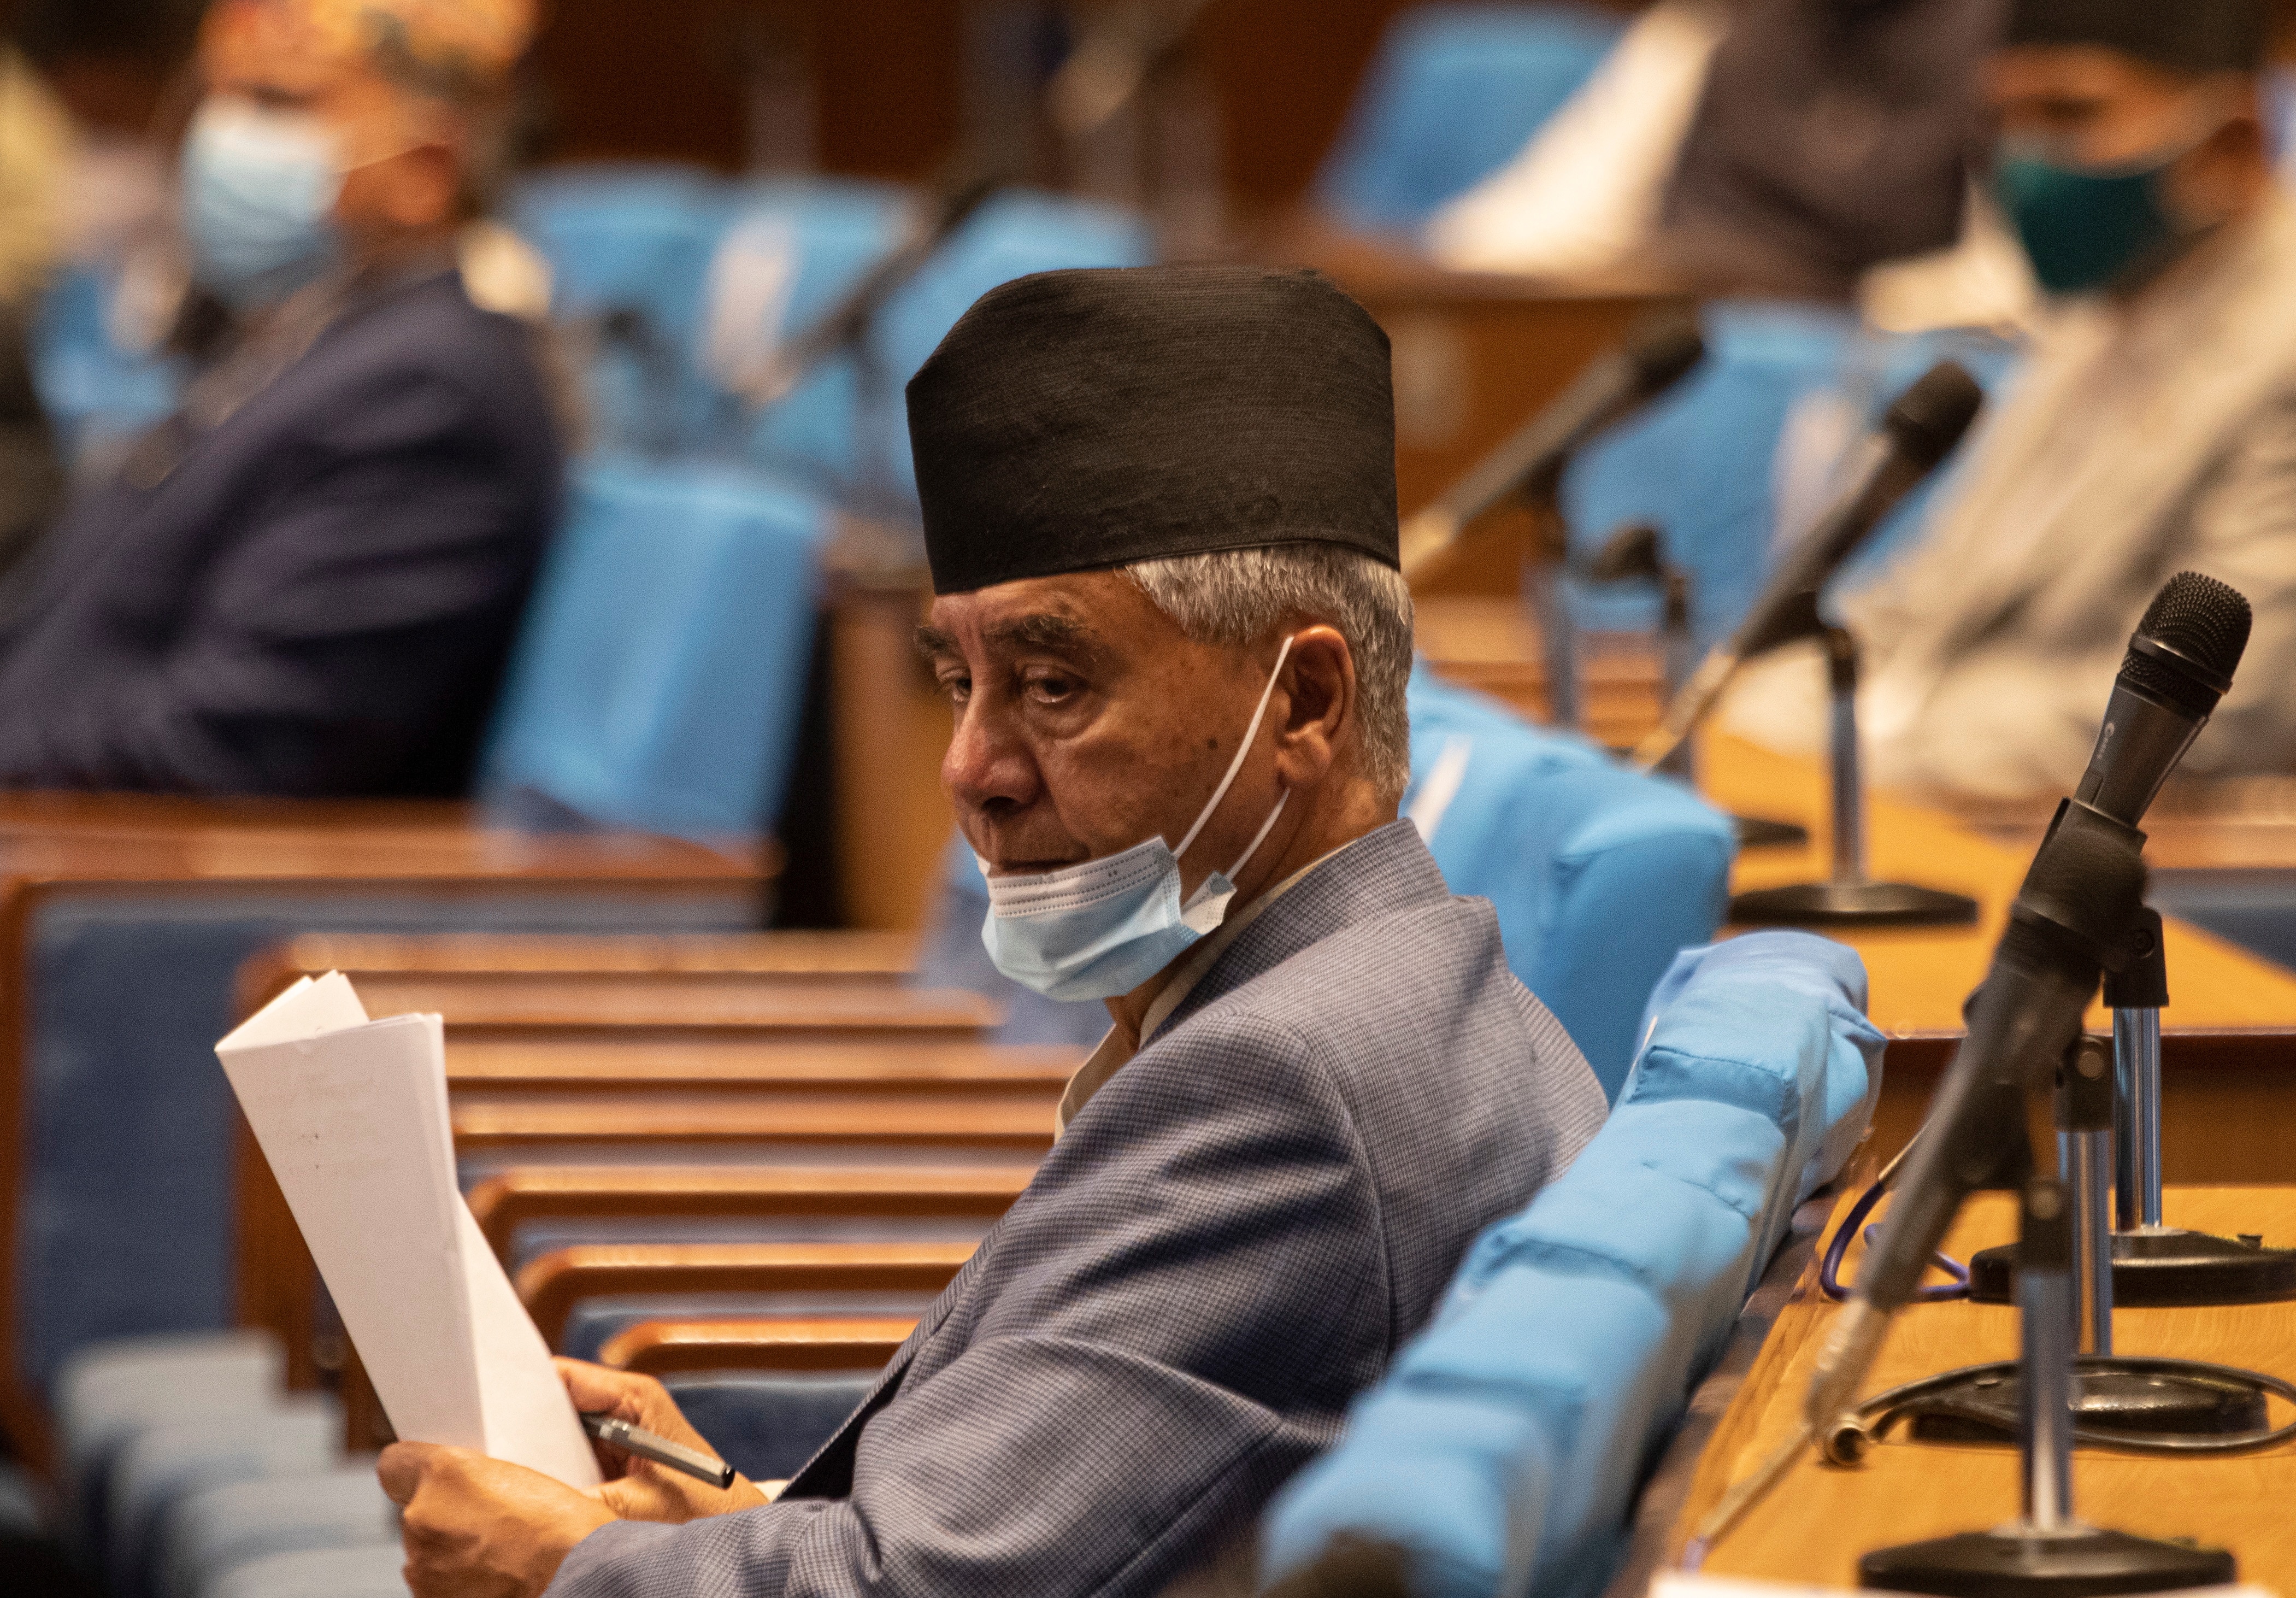 Prime Minister Sher Bahadur Deuba is set to face a vote of confidence in the House of Representatives on 18 July. Nepals Supreme Court reinstated its parliament on 12 July 2021, which was dissolved by former Prime Minister K.P. Sharma Oli in May 2021, and